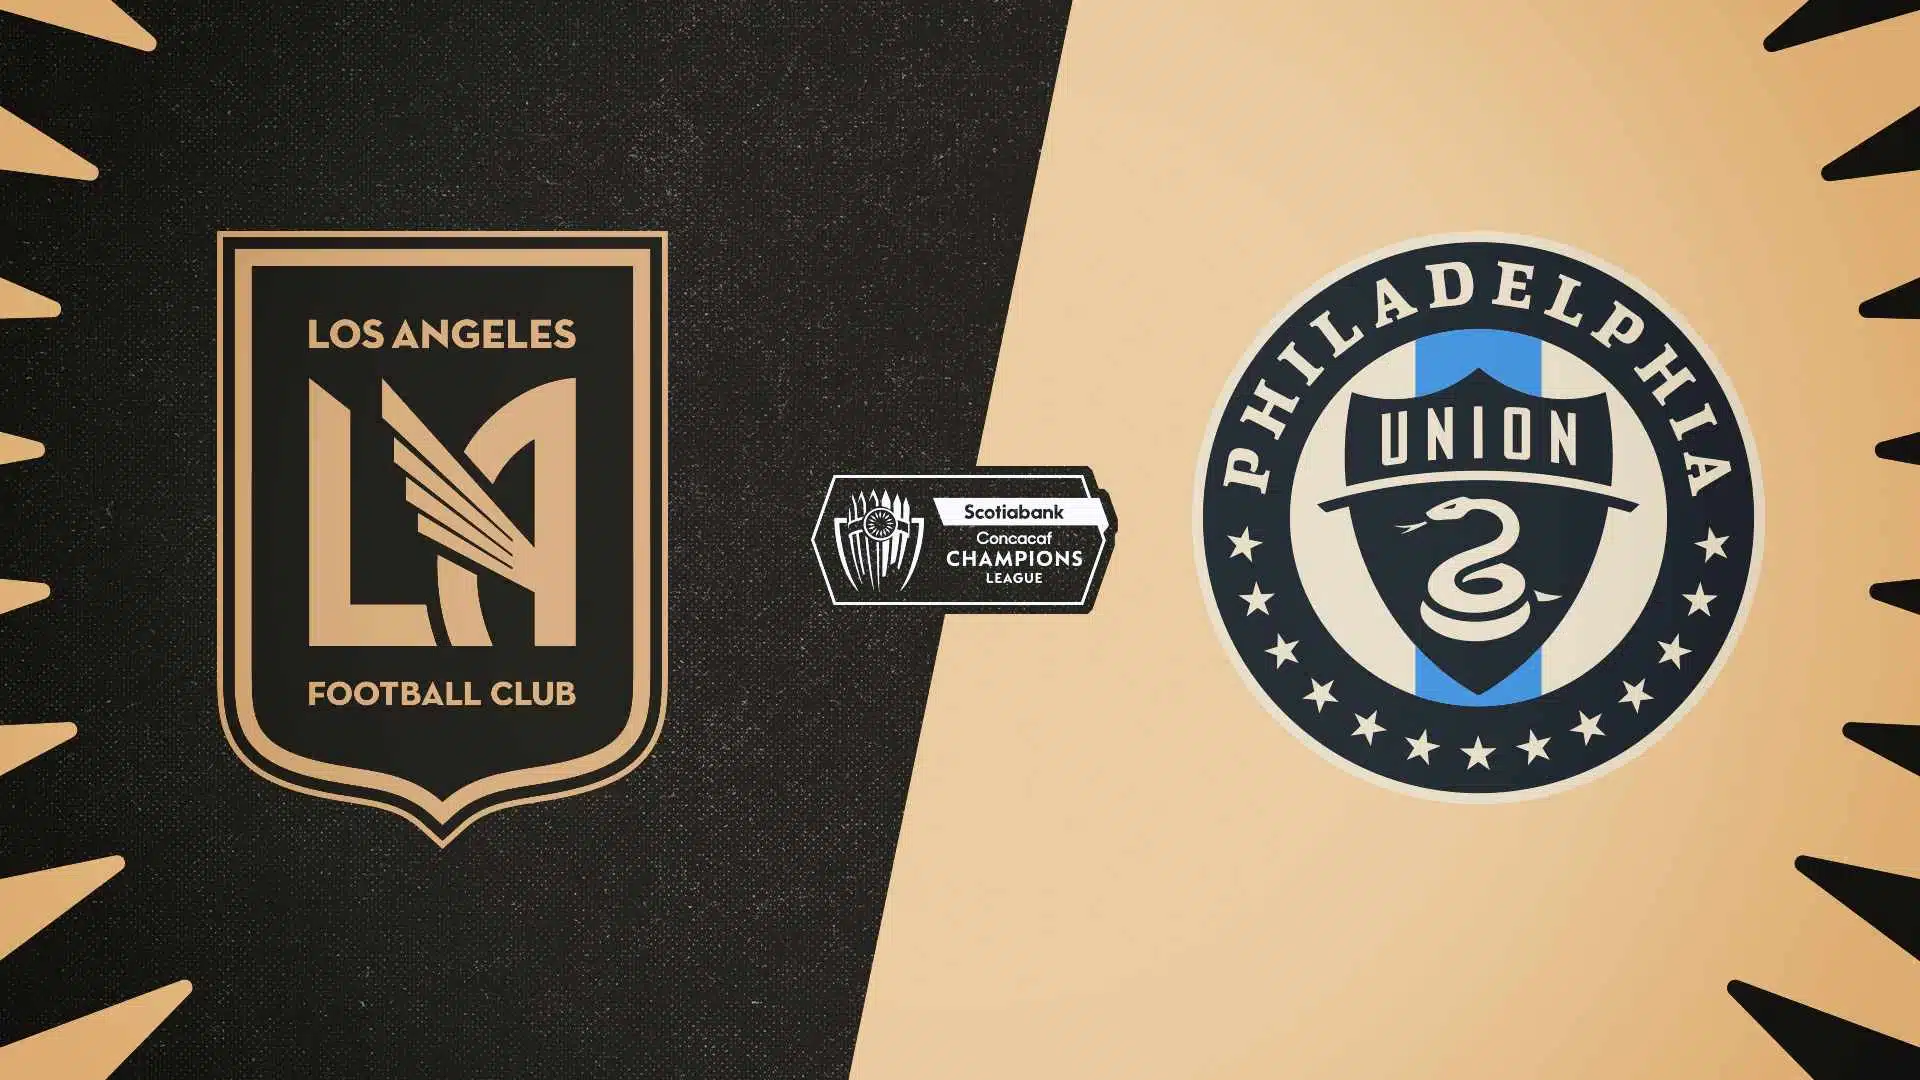 Can the Philadelphia Union get Revenge against LAFC to make the Finals of CONCACAF Champions League